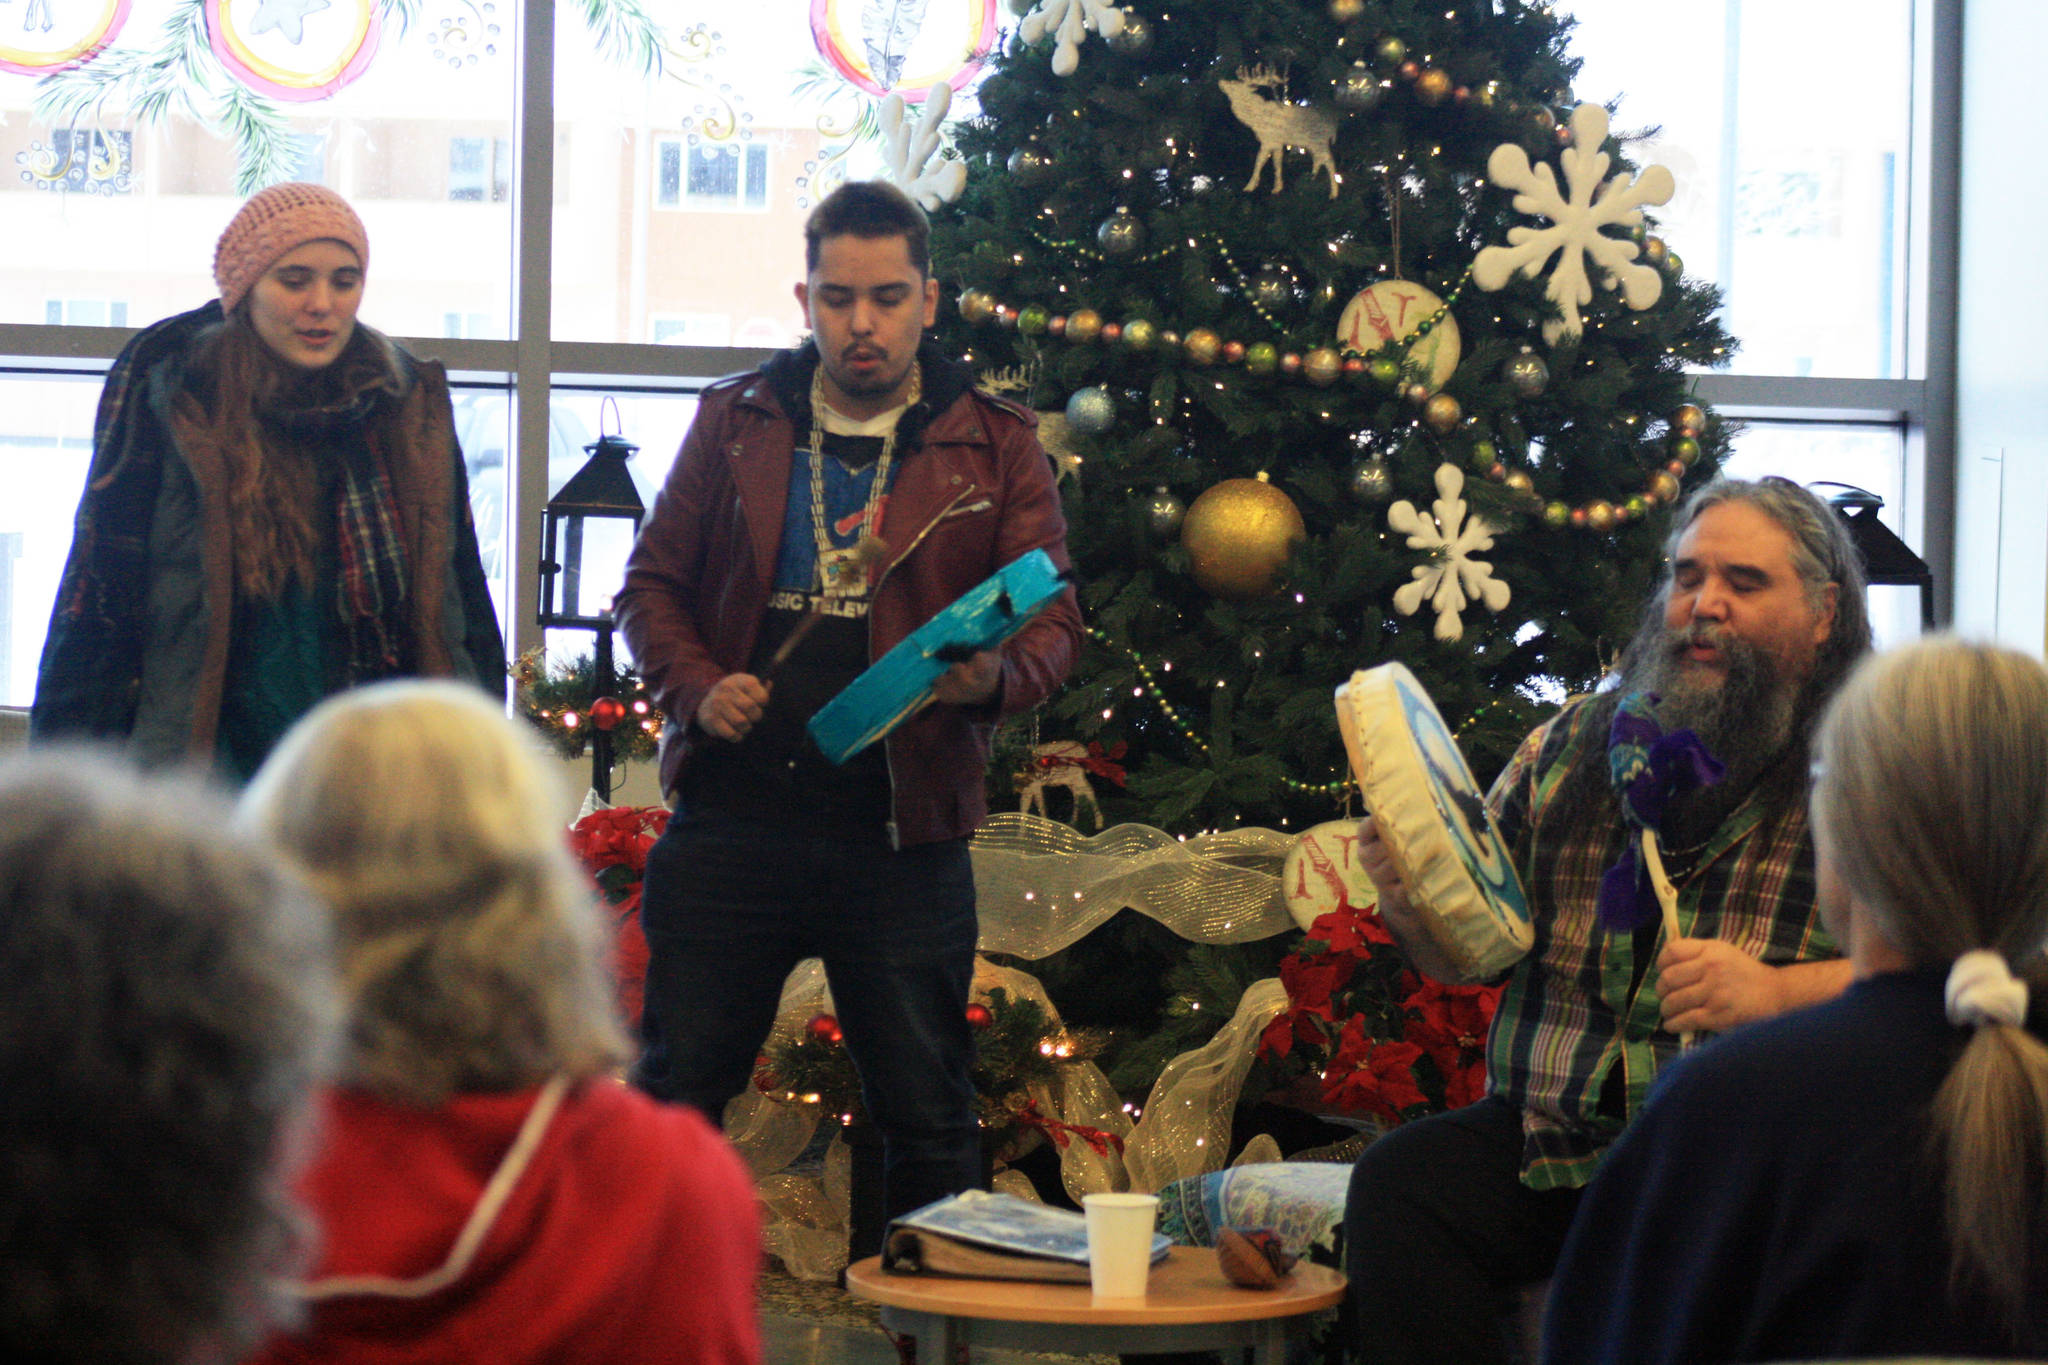 Jasmine Koster and Jimmy Starkloff perform alongside local musician George Demientieff Holly (right) during a Dec. 21 winter solstice performance at Dena’ina Wellness Center in Old Town Kenai. (Photo by Erin Thompson/Peninsula Clarion)